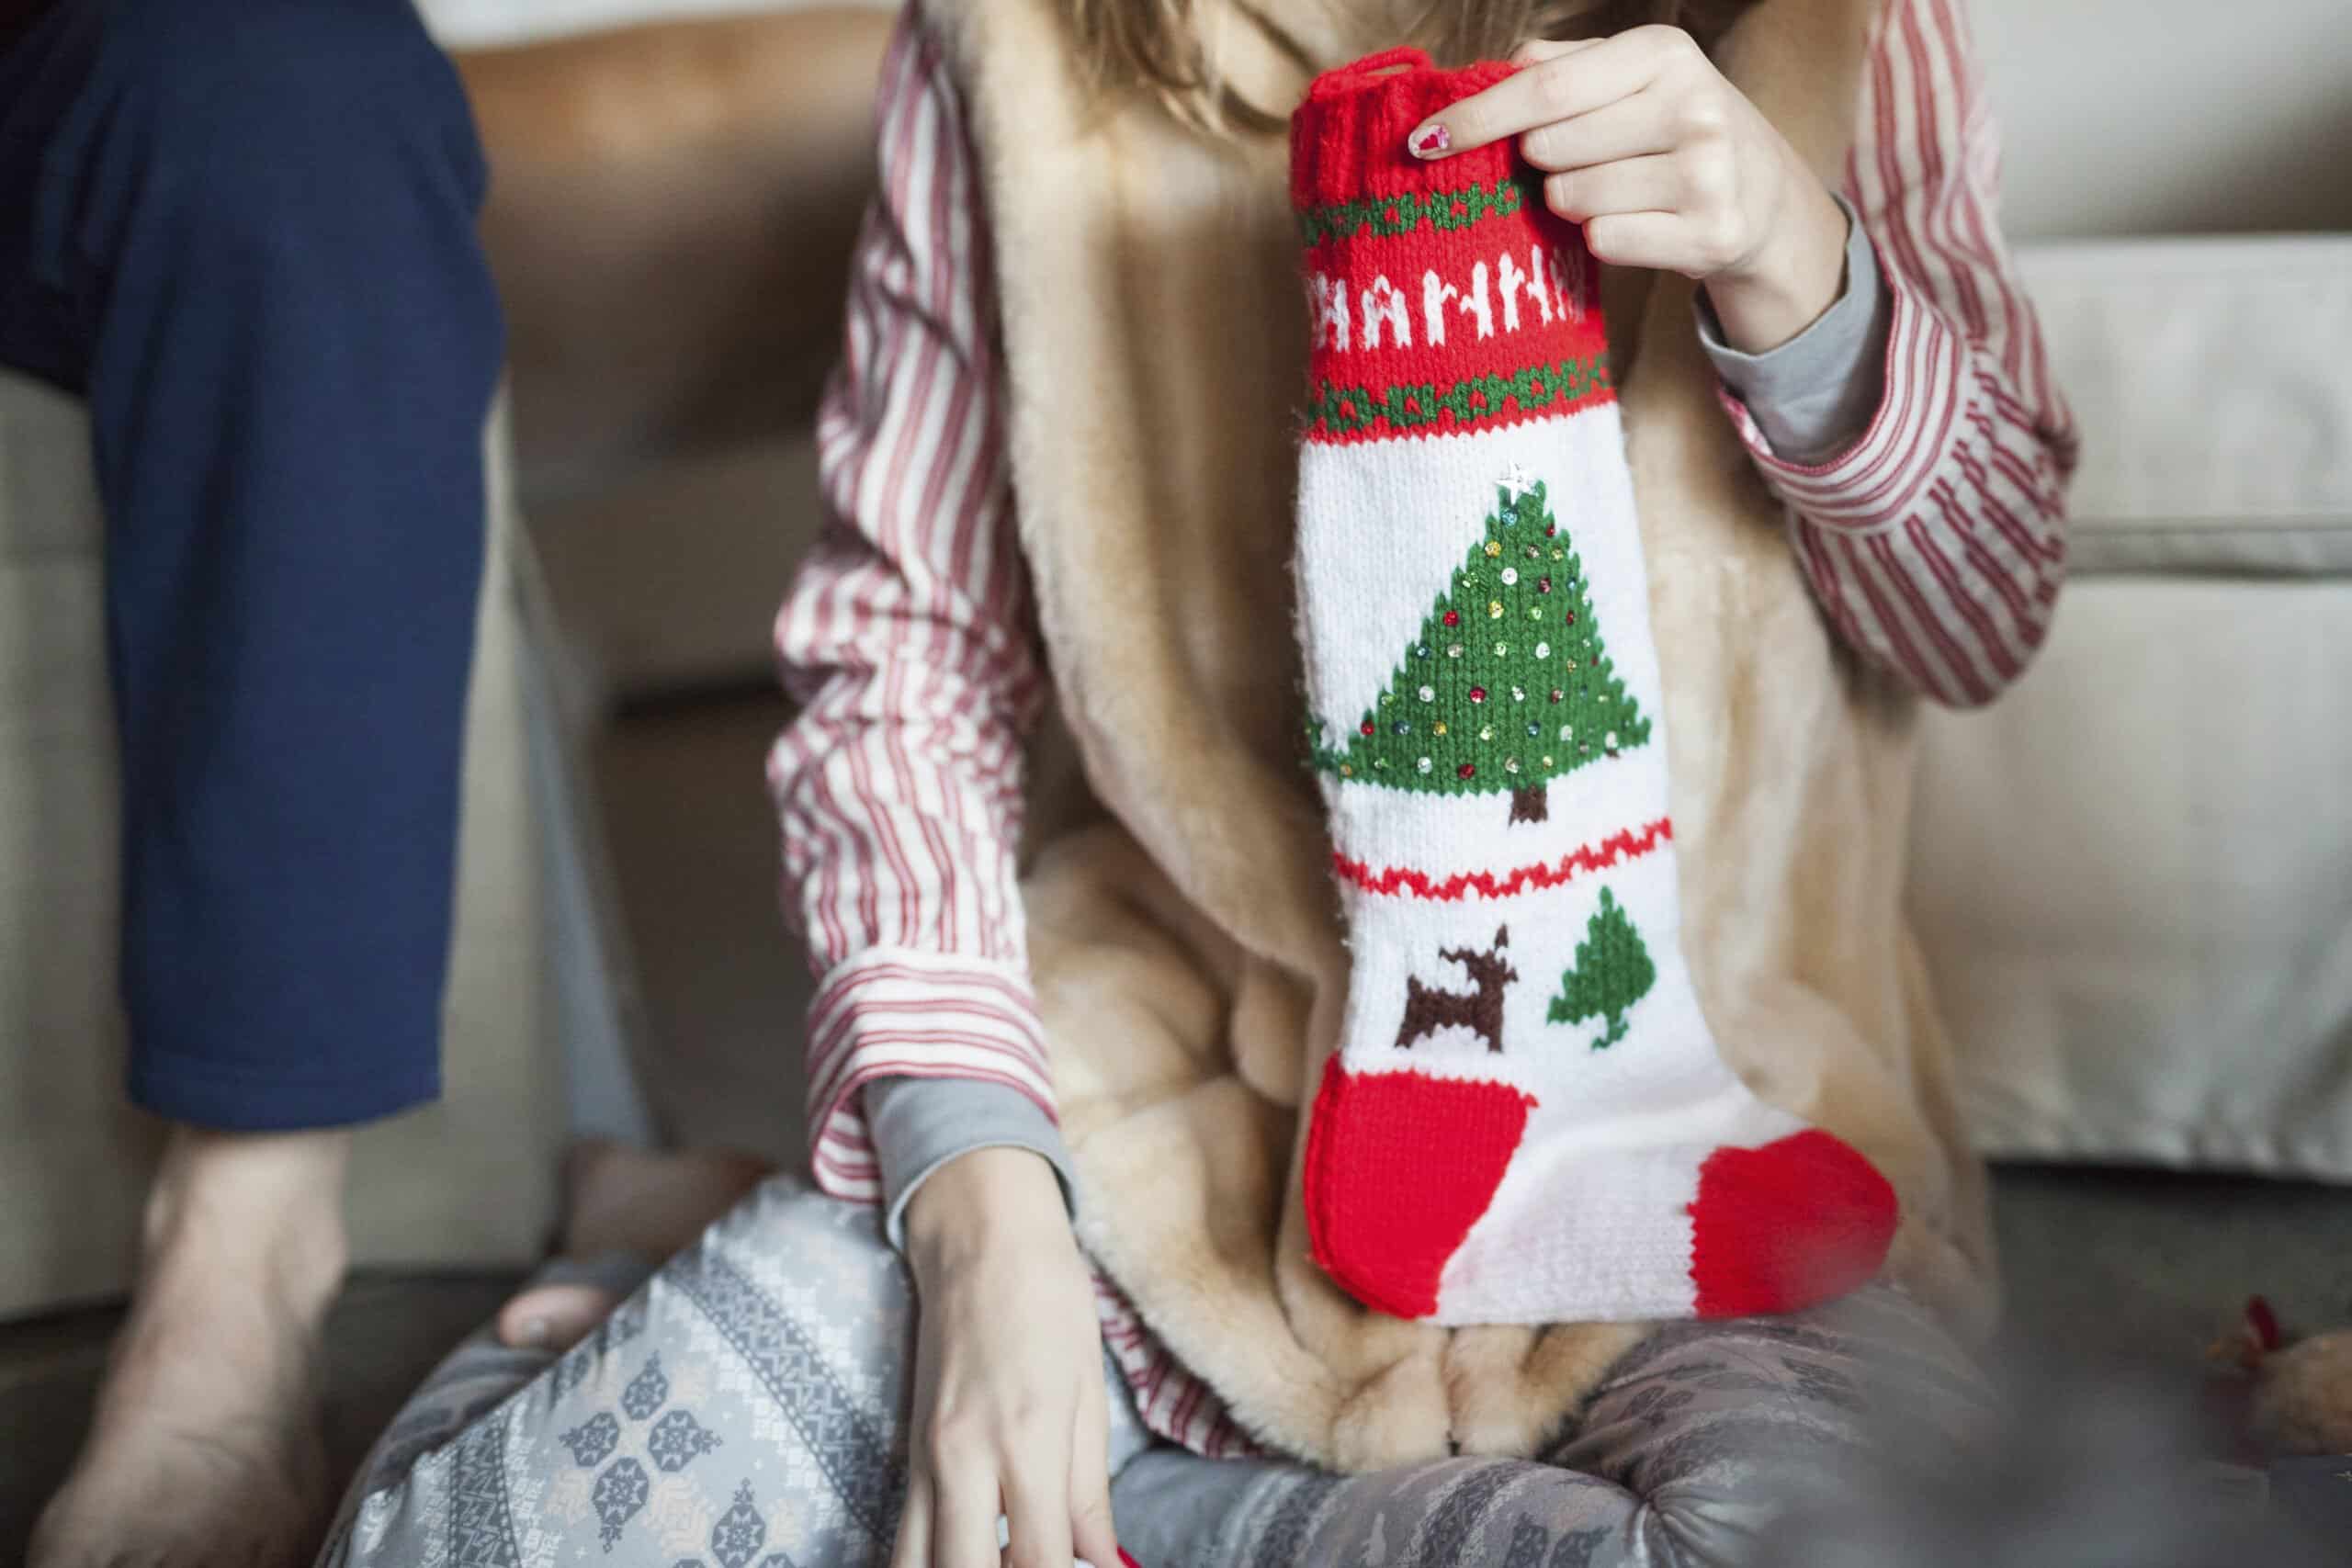 Featured image for Stocking Stuffer Ideas for Mom - shows a woman in pyjamas holding a Christmas stocking